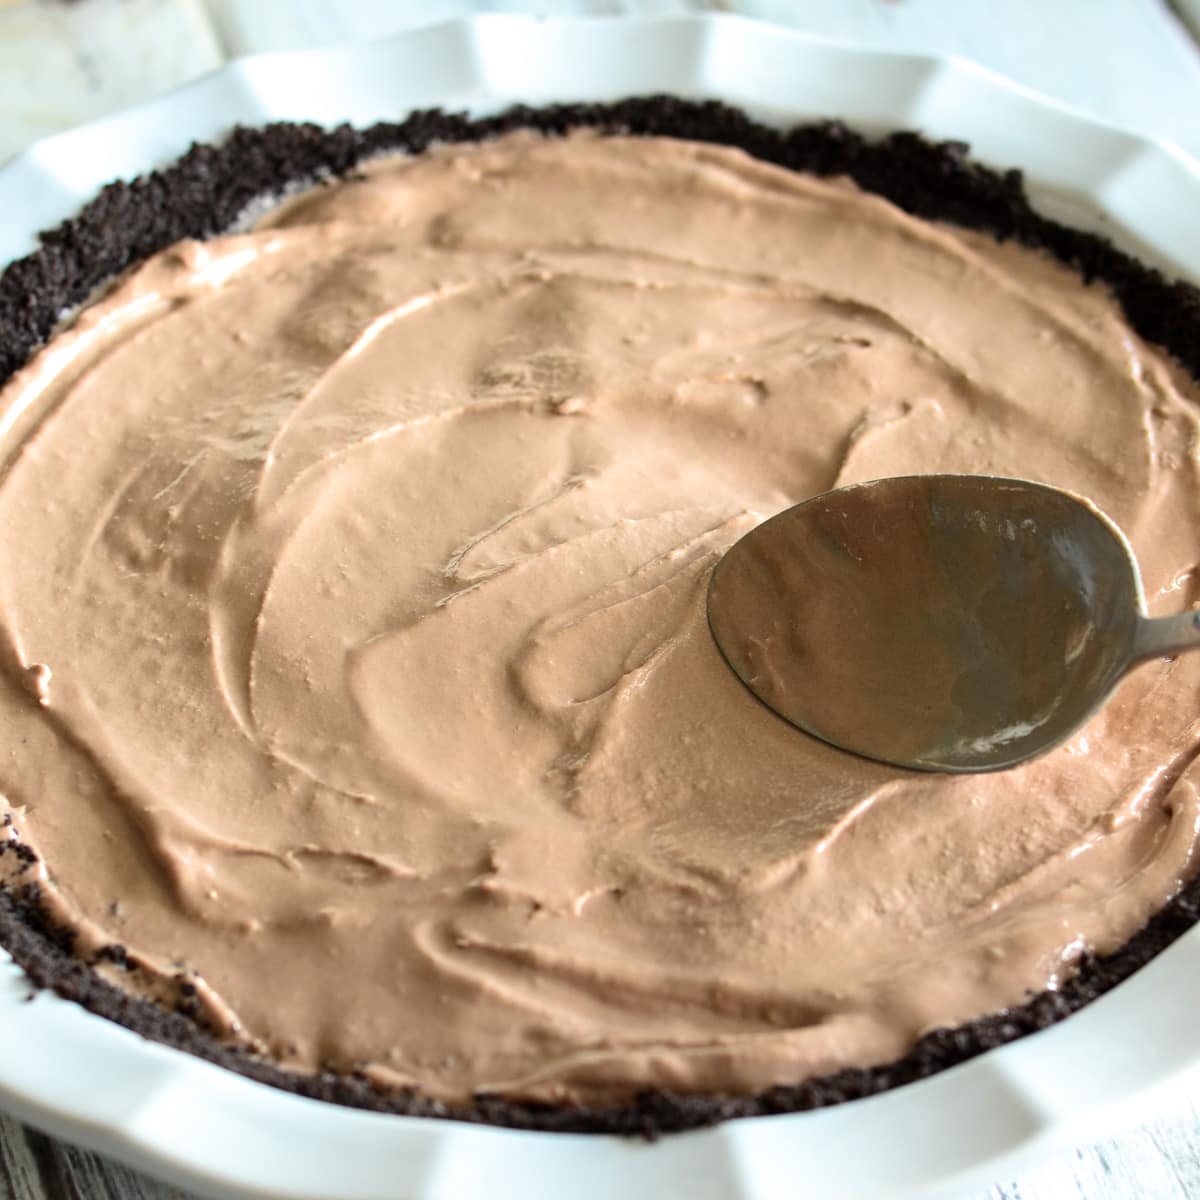 Mud pie filling poured into Oreo crust.